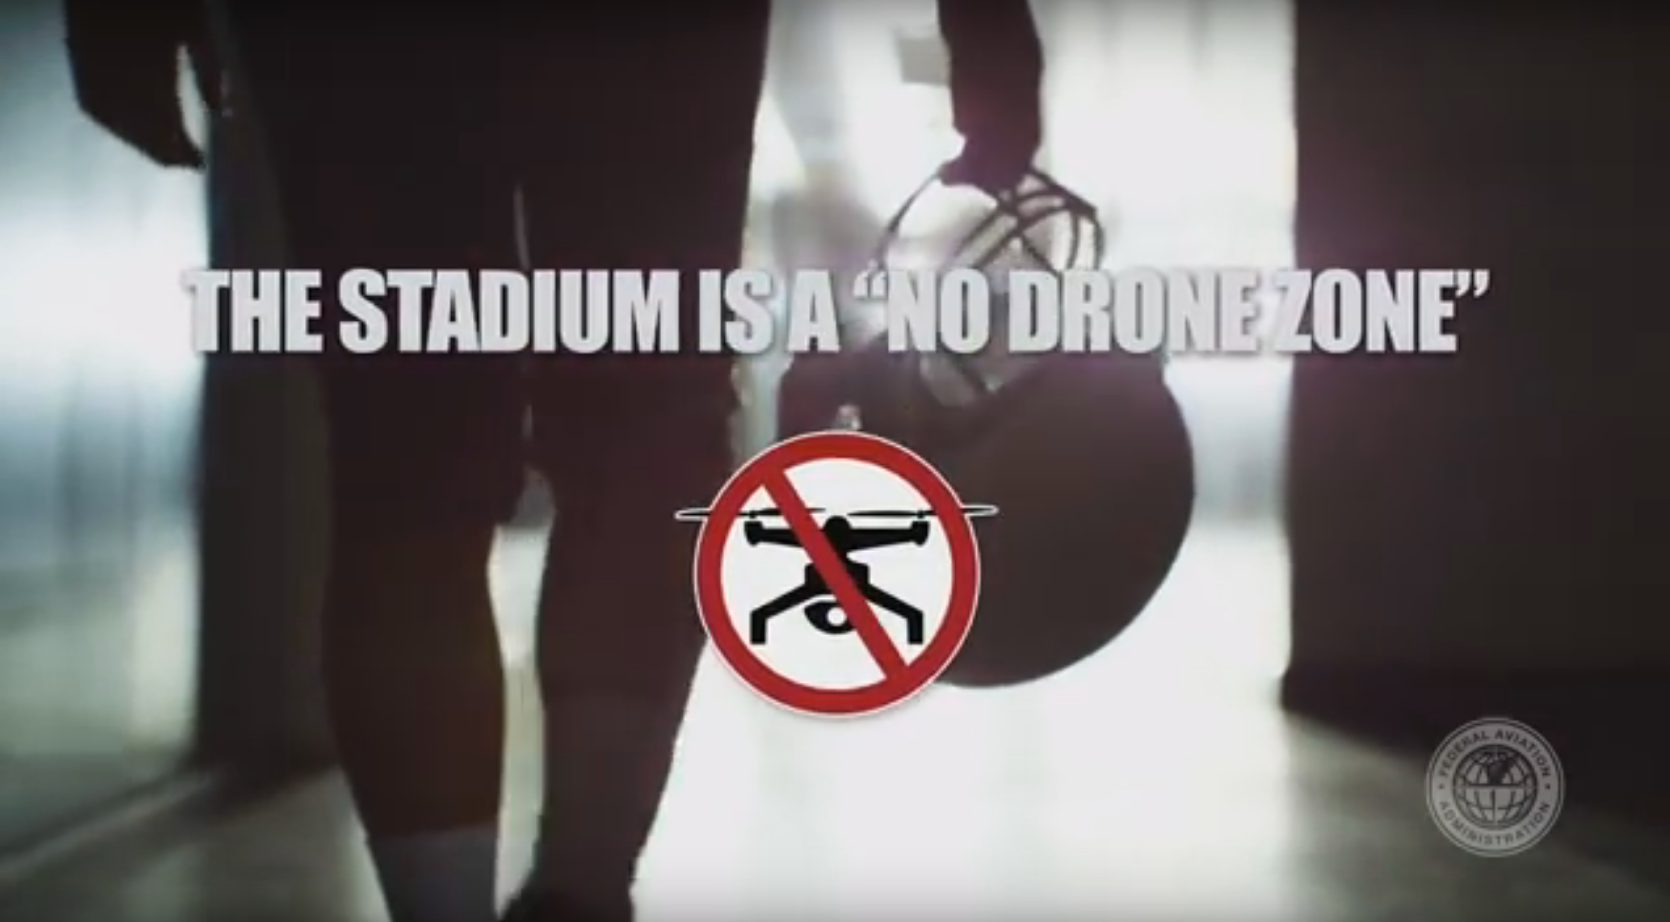 Will drones only be allowed to fly at Disney? ‘No drone zone’ declared at Super Bowl, as drone crashes into Empire State Building